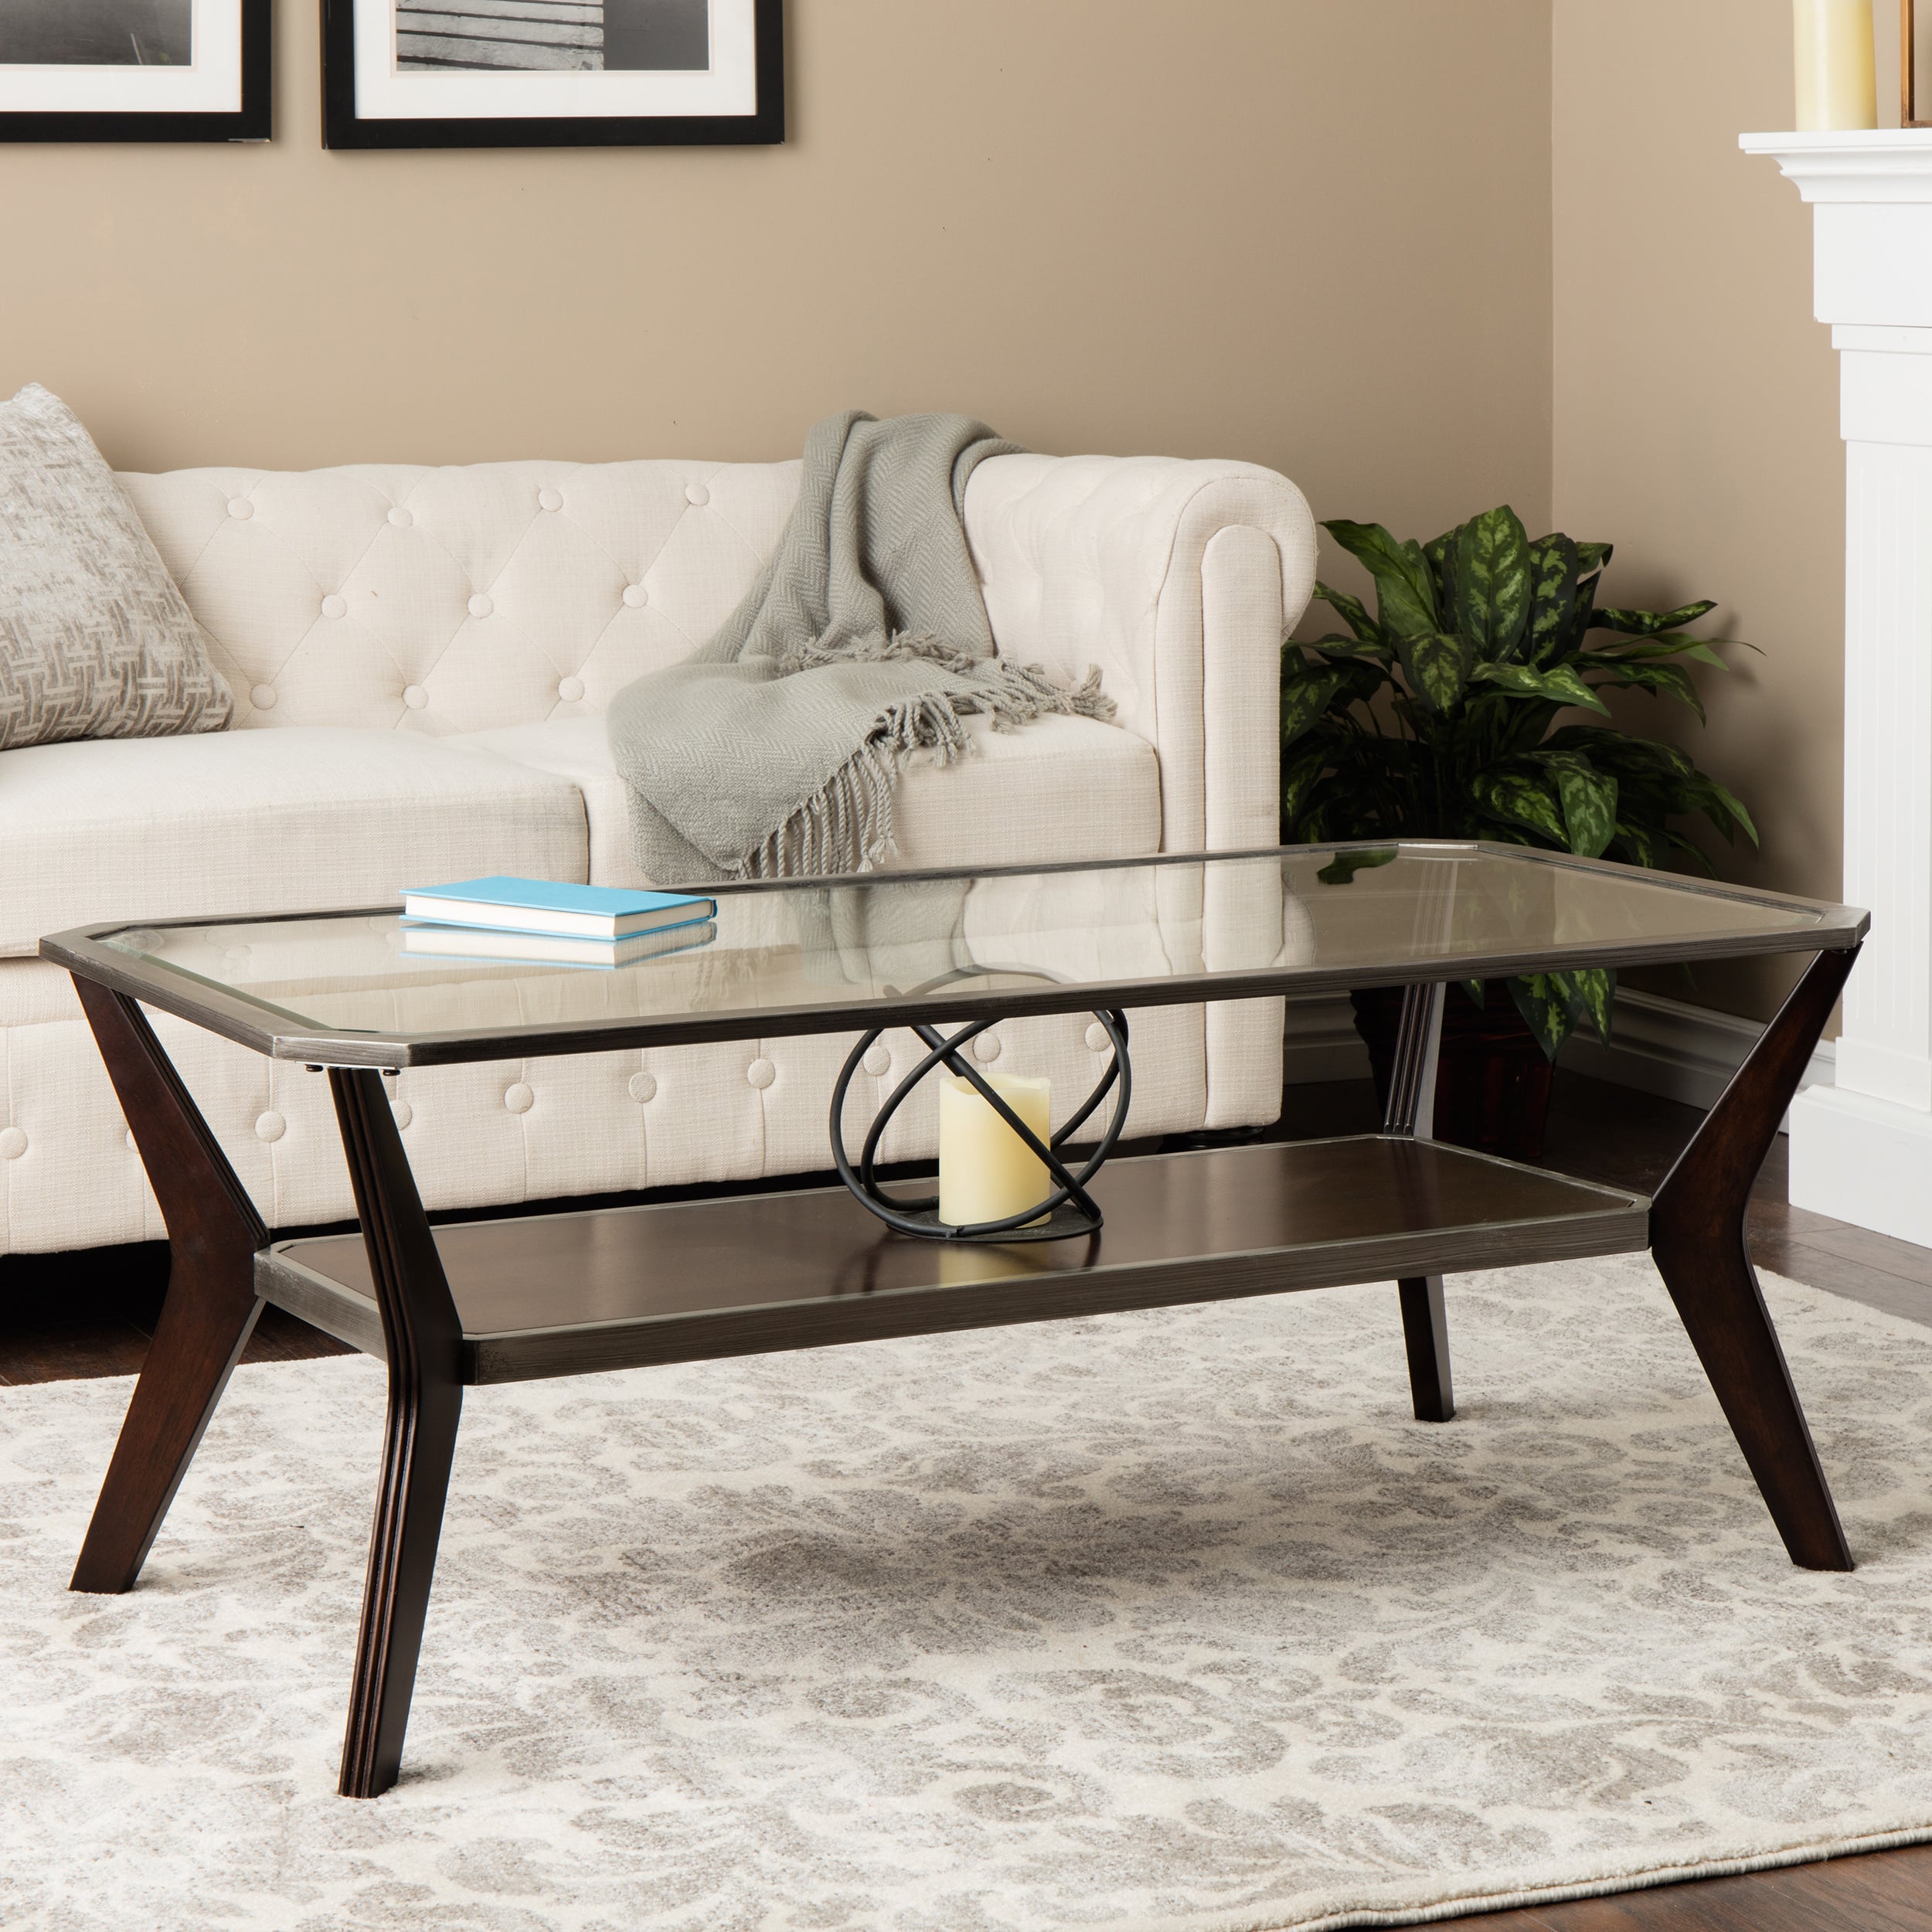 Buy Coffee, Console, Sofa & End Tables Online at Overstock | Our Best Living Room Furniture Deals